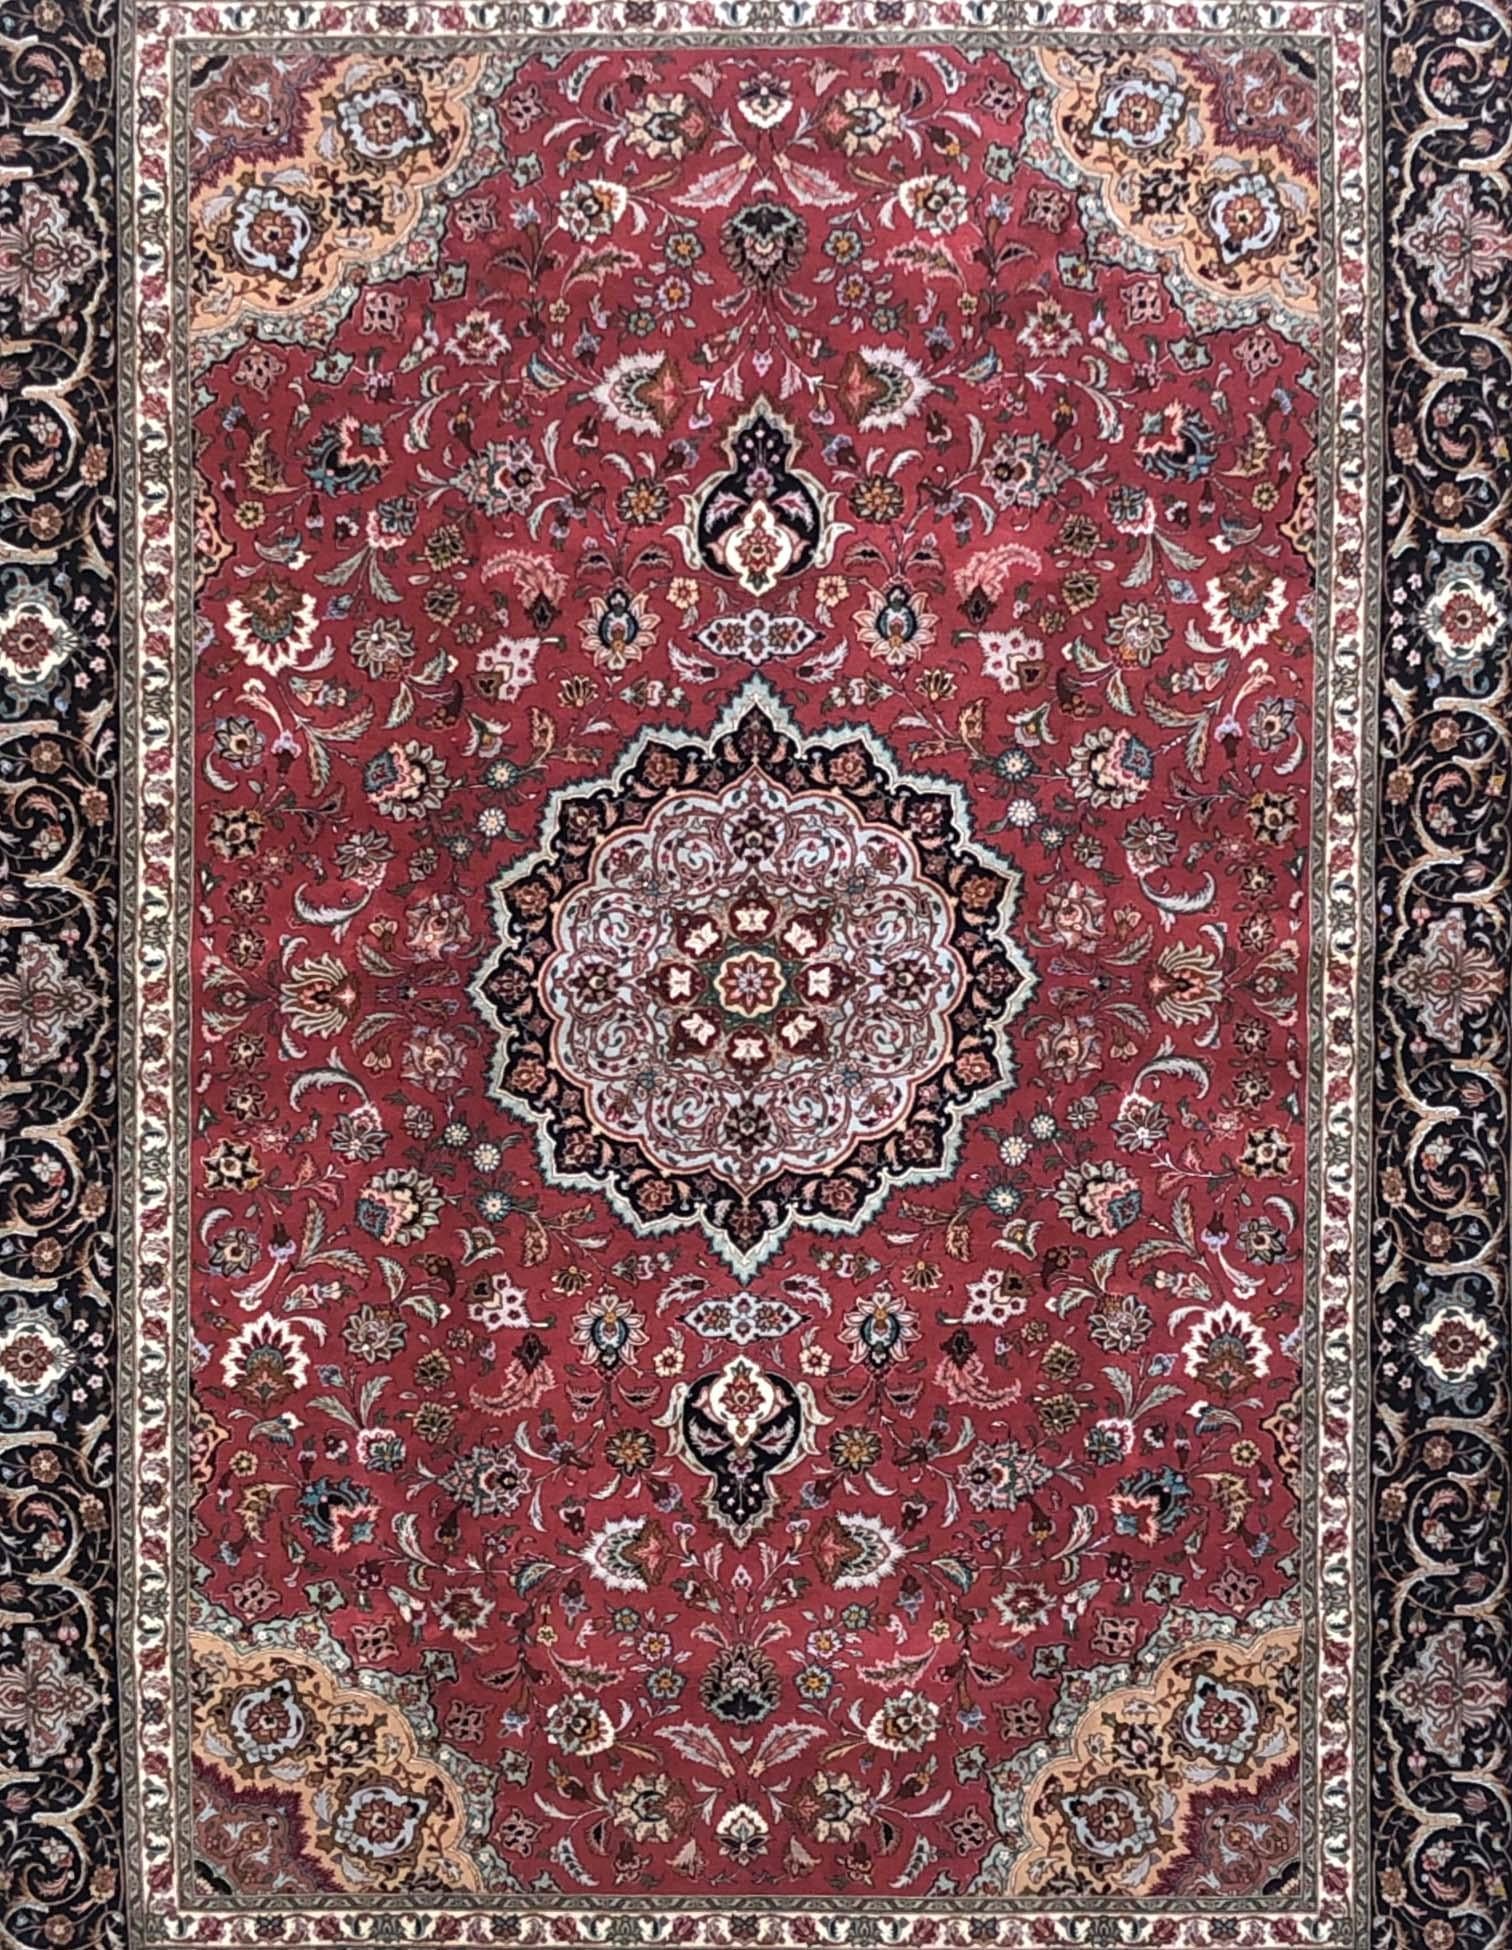 This authentic Persian handmade rug has wool and silk pile with cotton foundation. This rug is from Tabriz and has Javad Ghalam design. This rug has red base color with black border color. This is a brand new rug. The size is 6 feet 7 inches by 9